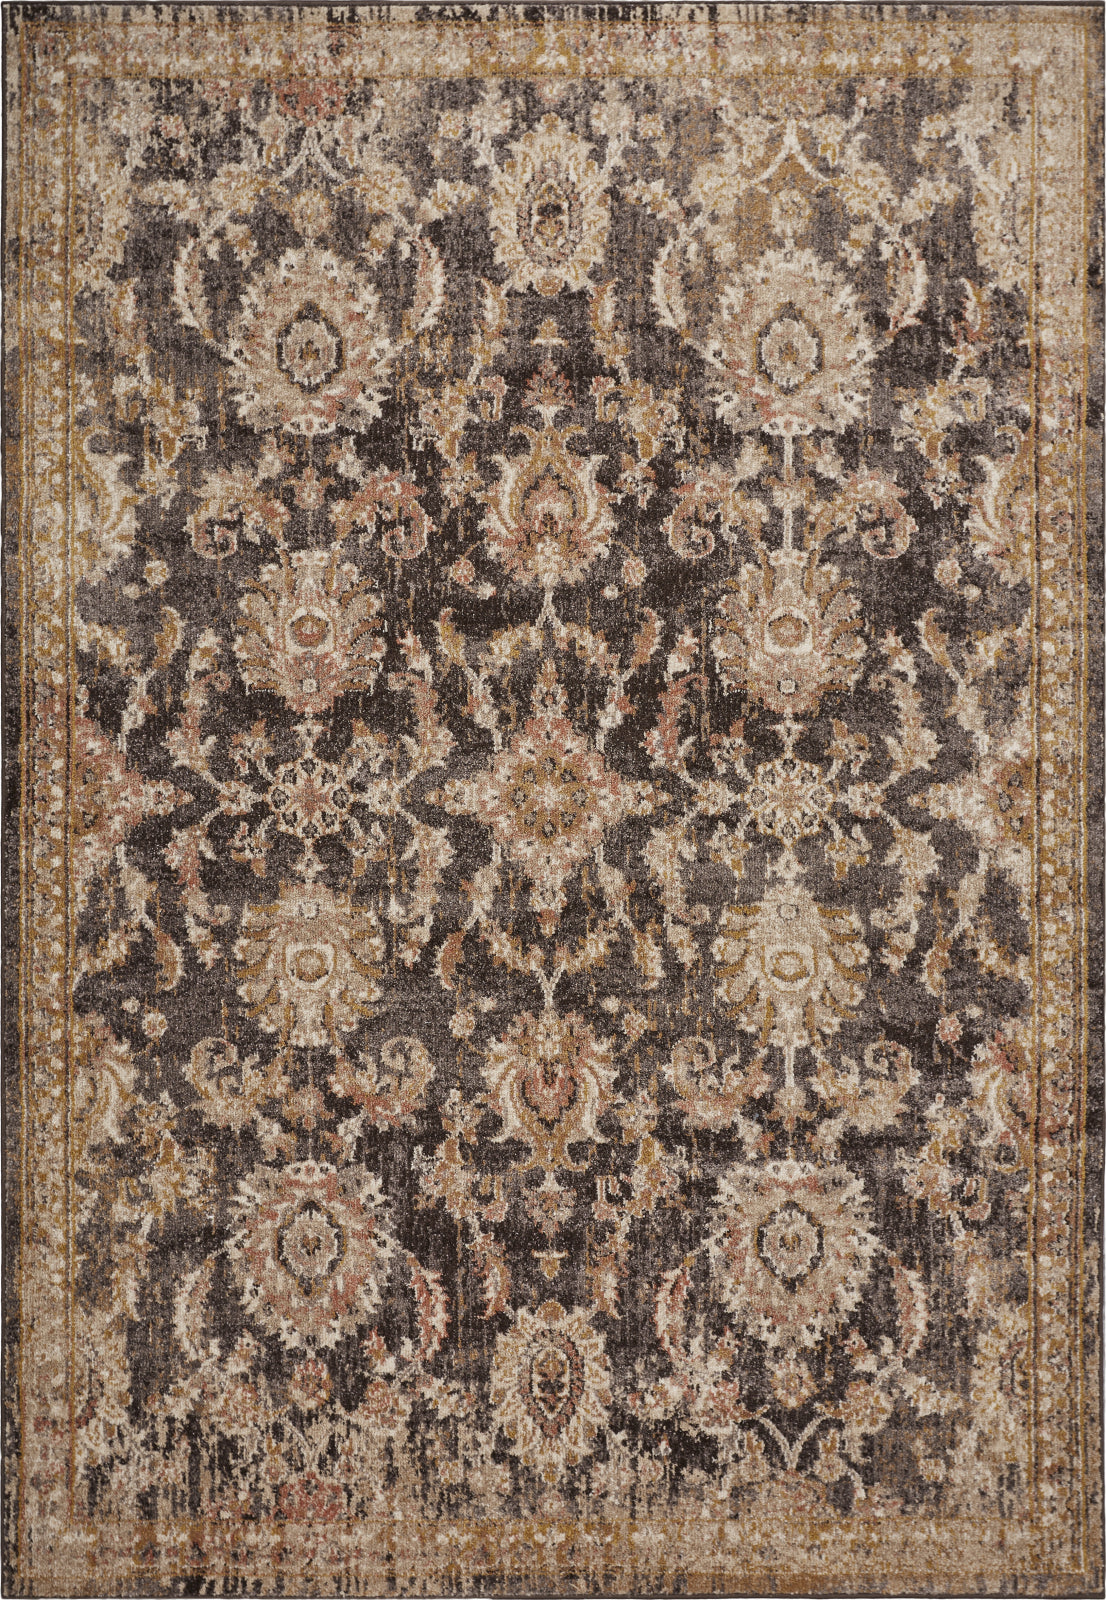 KAS Manor 6352 Taupe Chester Area Rug main image